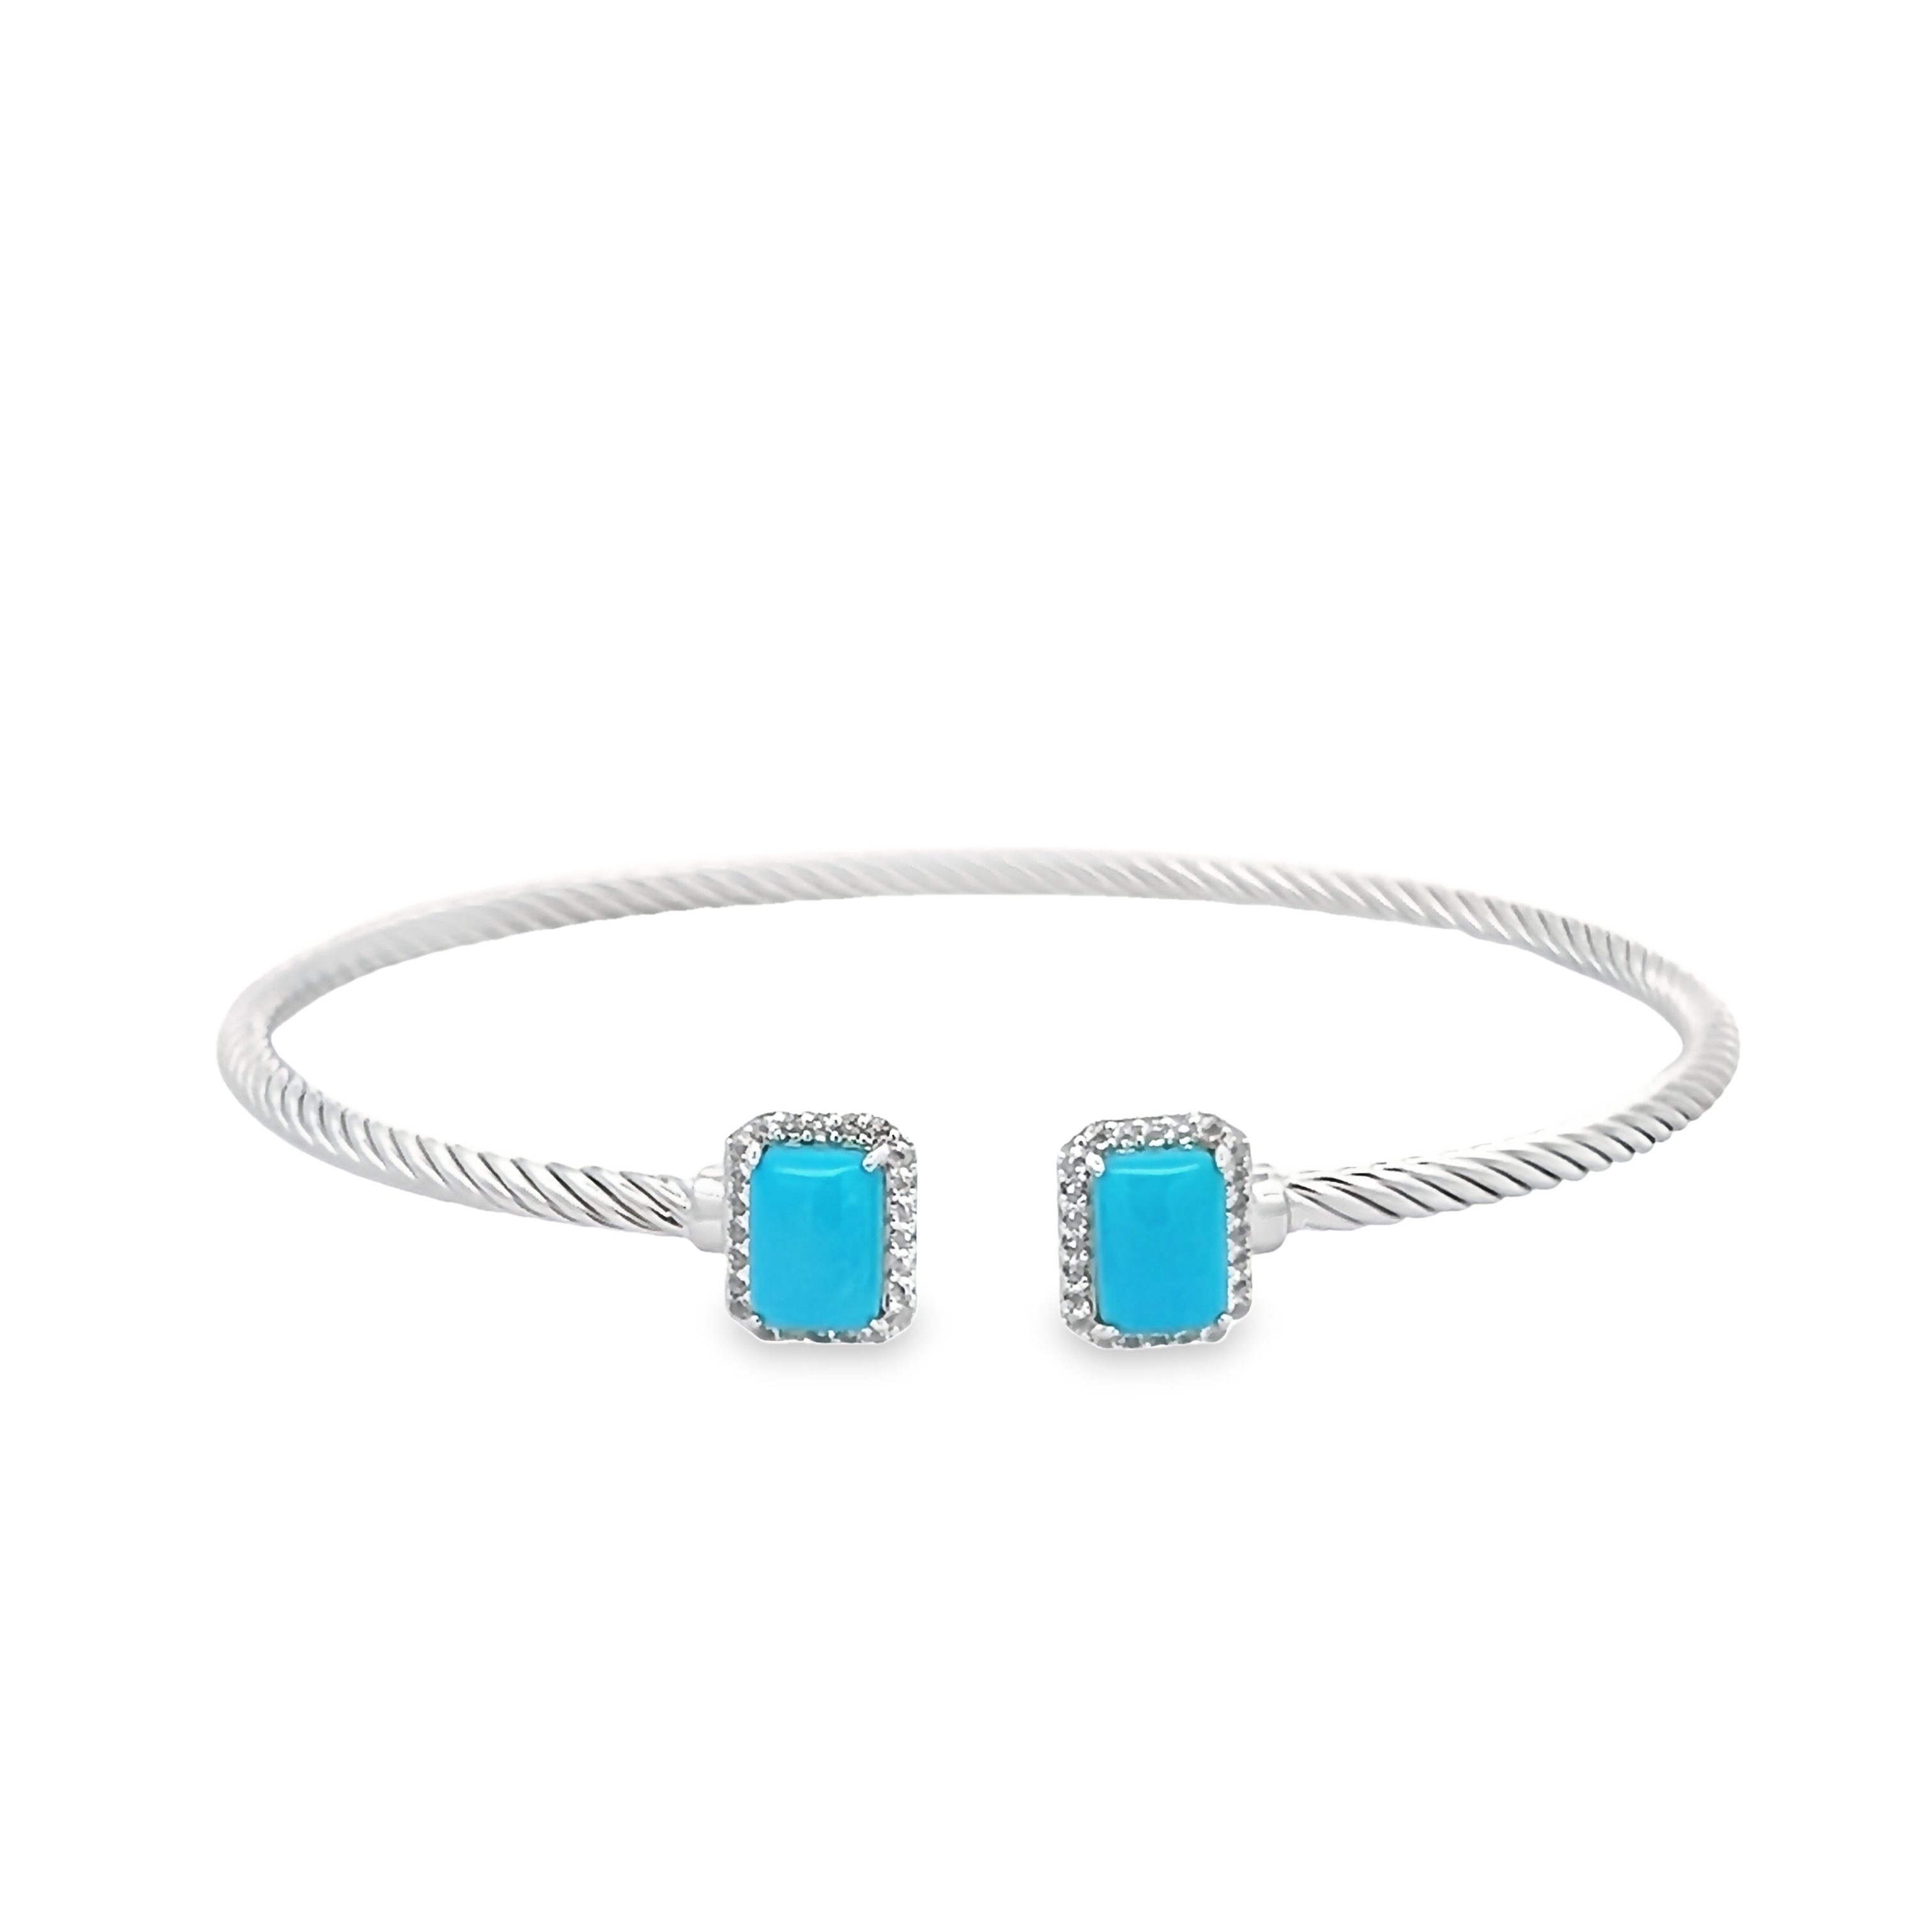 Sterling Silver Turquoise And Topaz Bangle Bracelet